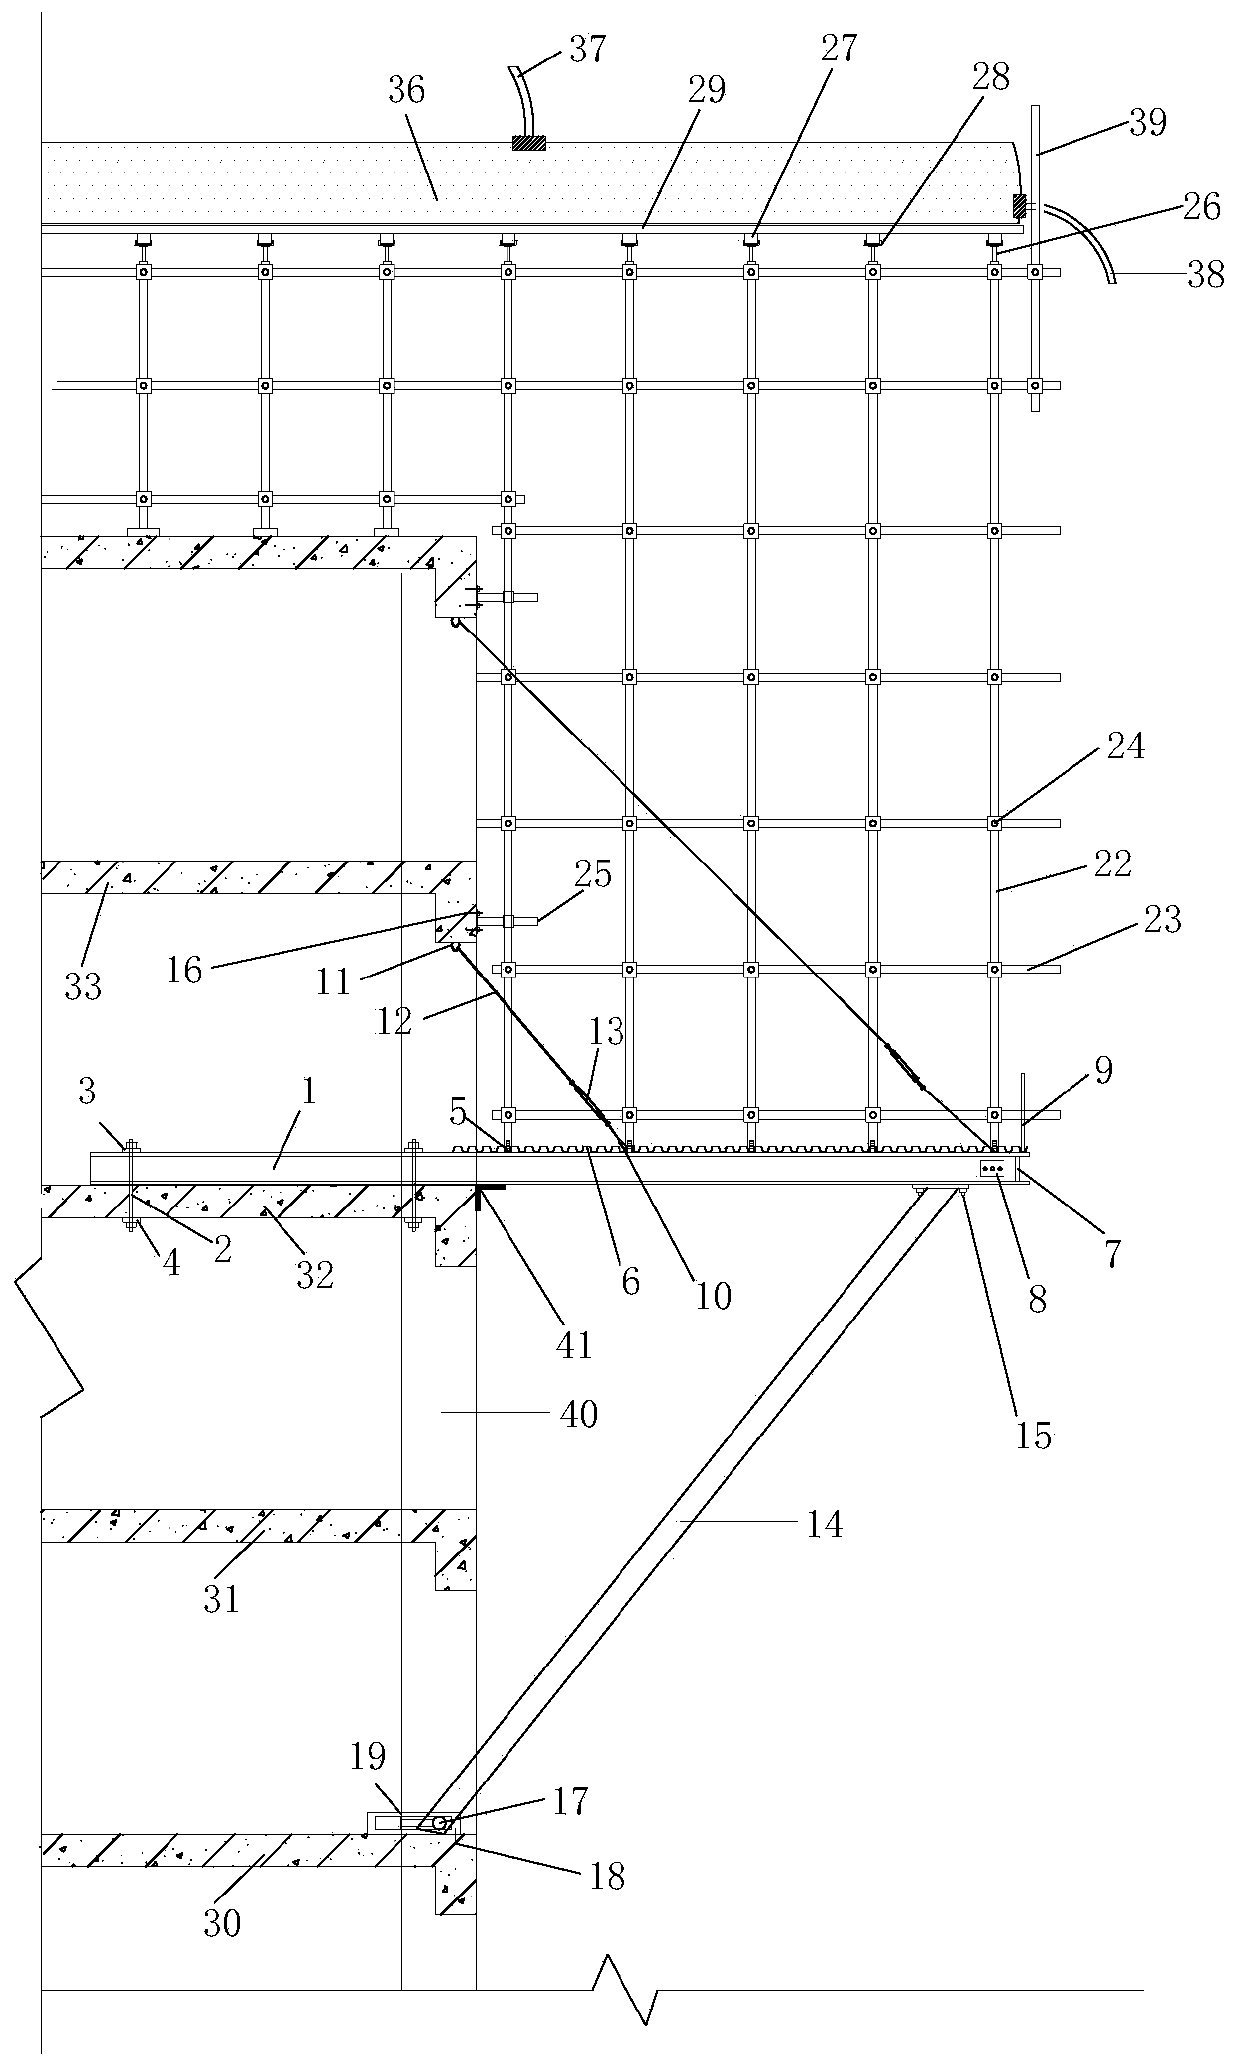 Composite Formwork System and Construction Method of Large Cantilever Beam and Slab